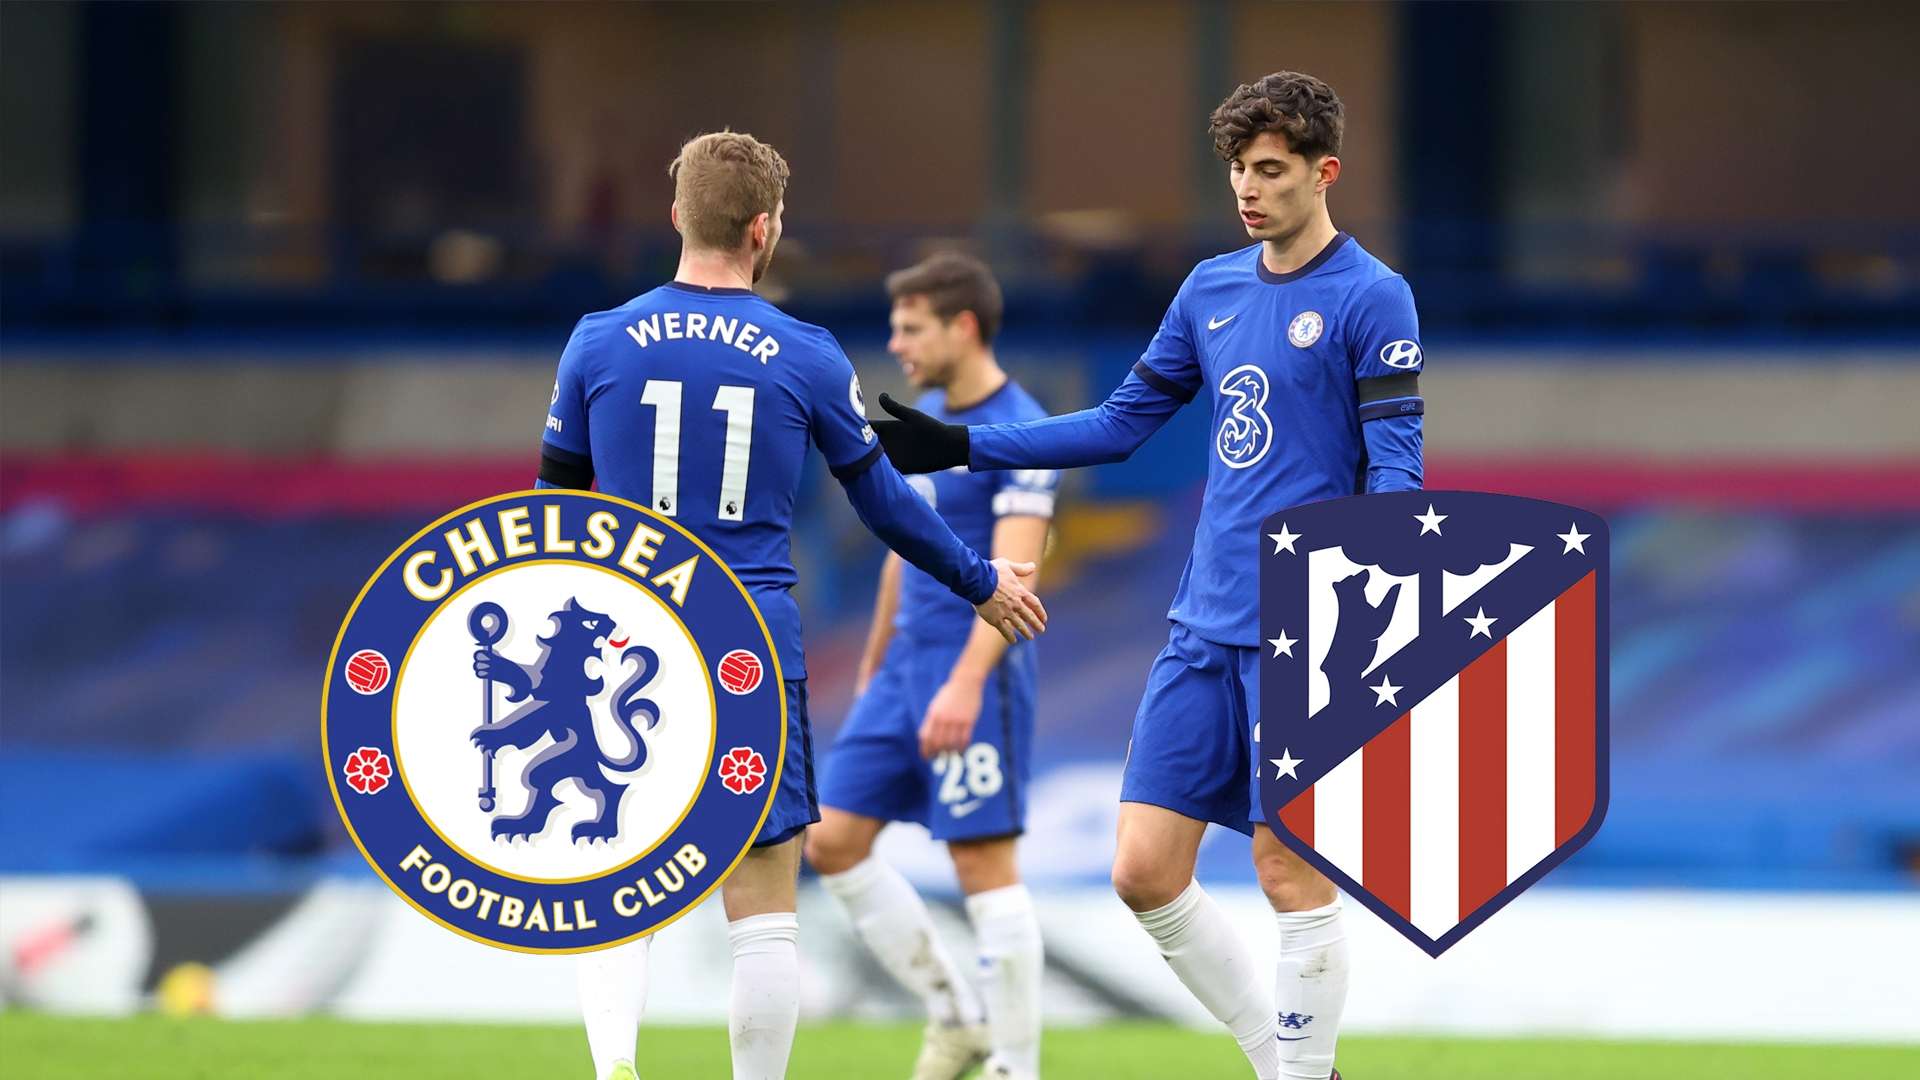 Header Gettyimages Timo Werner Kai Havertz FC Chelsea Atletico Madrid champions league 2020 2021 fußball heute live